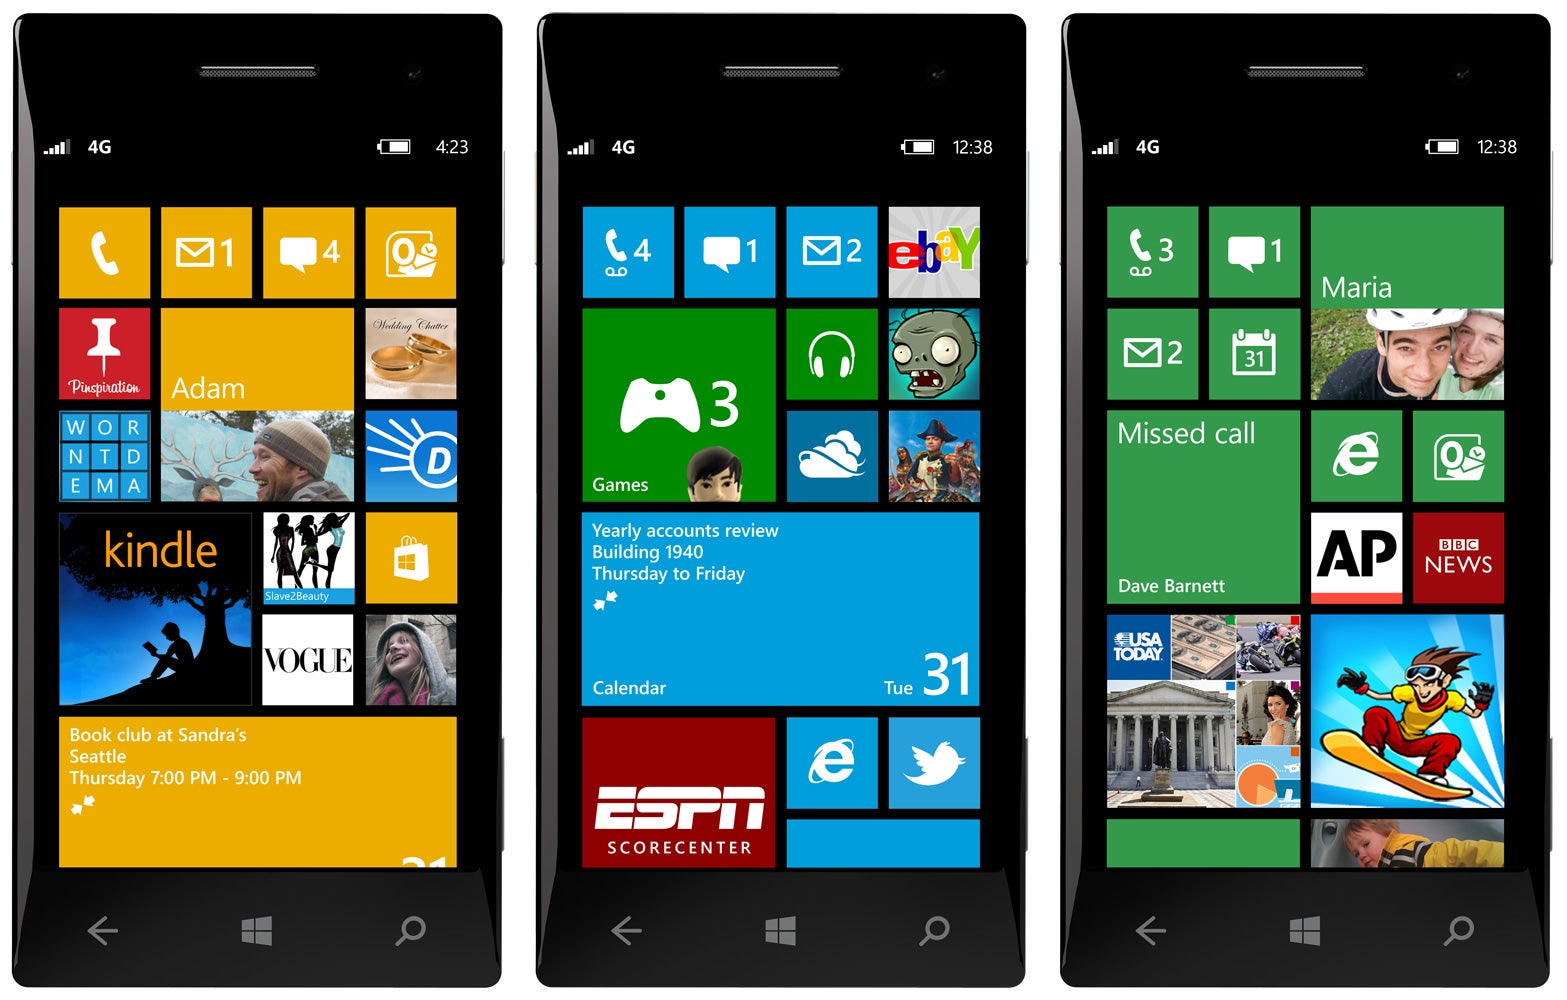 Which new Windows Phone 8 feature tickles your fancy most?